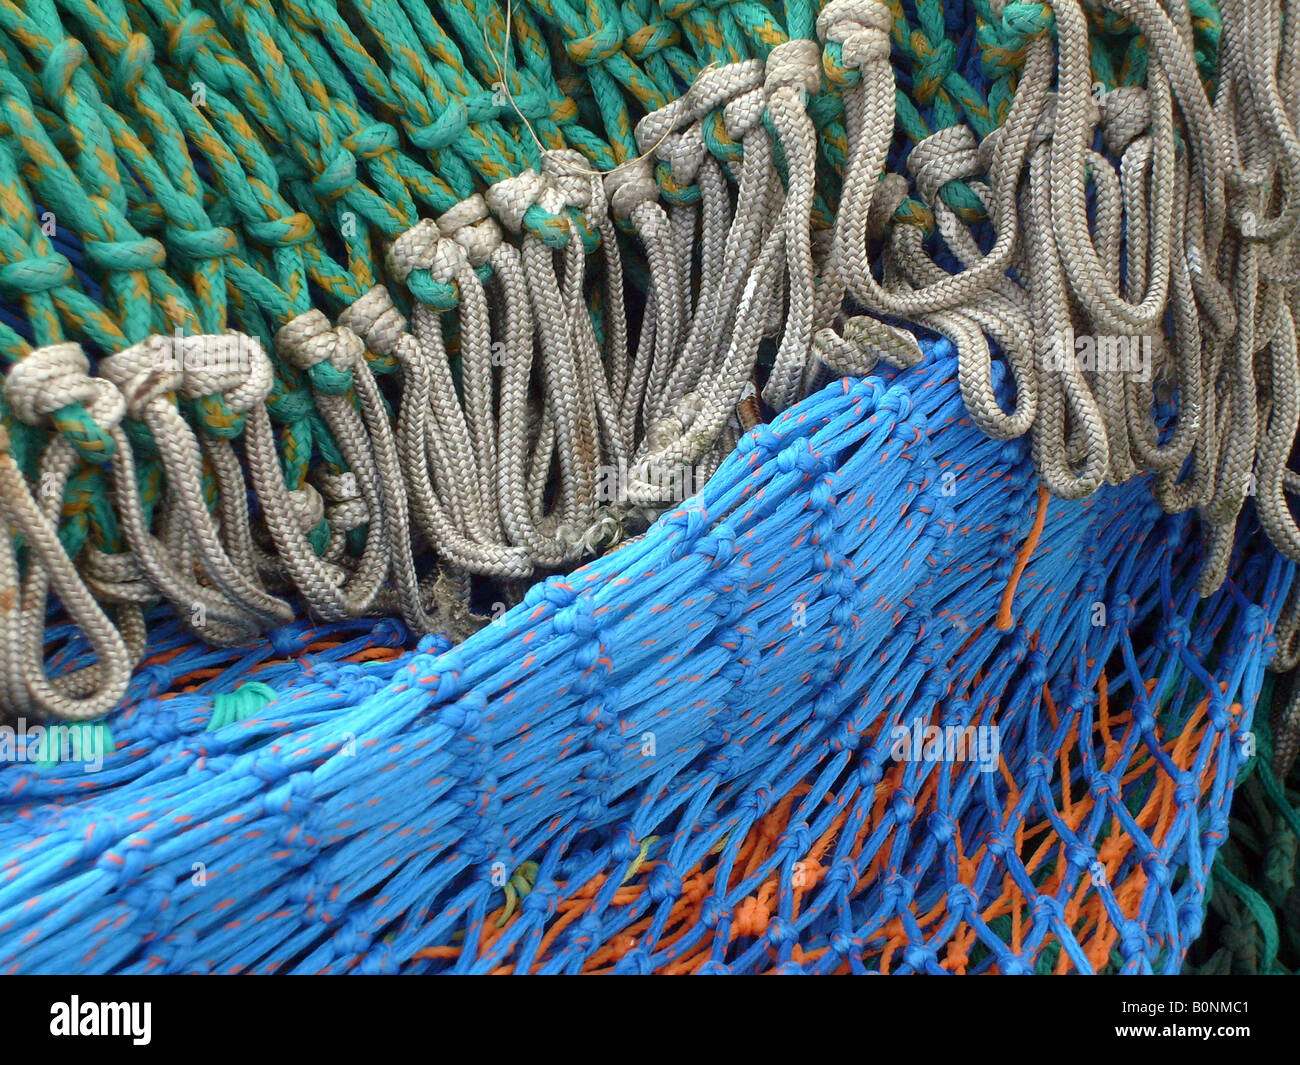 Colorful trawler fishing nets, Scarborough, North Yorkshire, England. Stock Photo